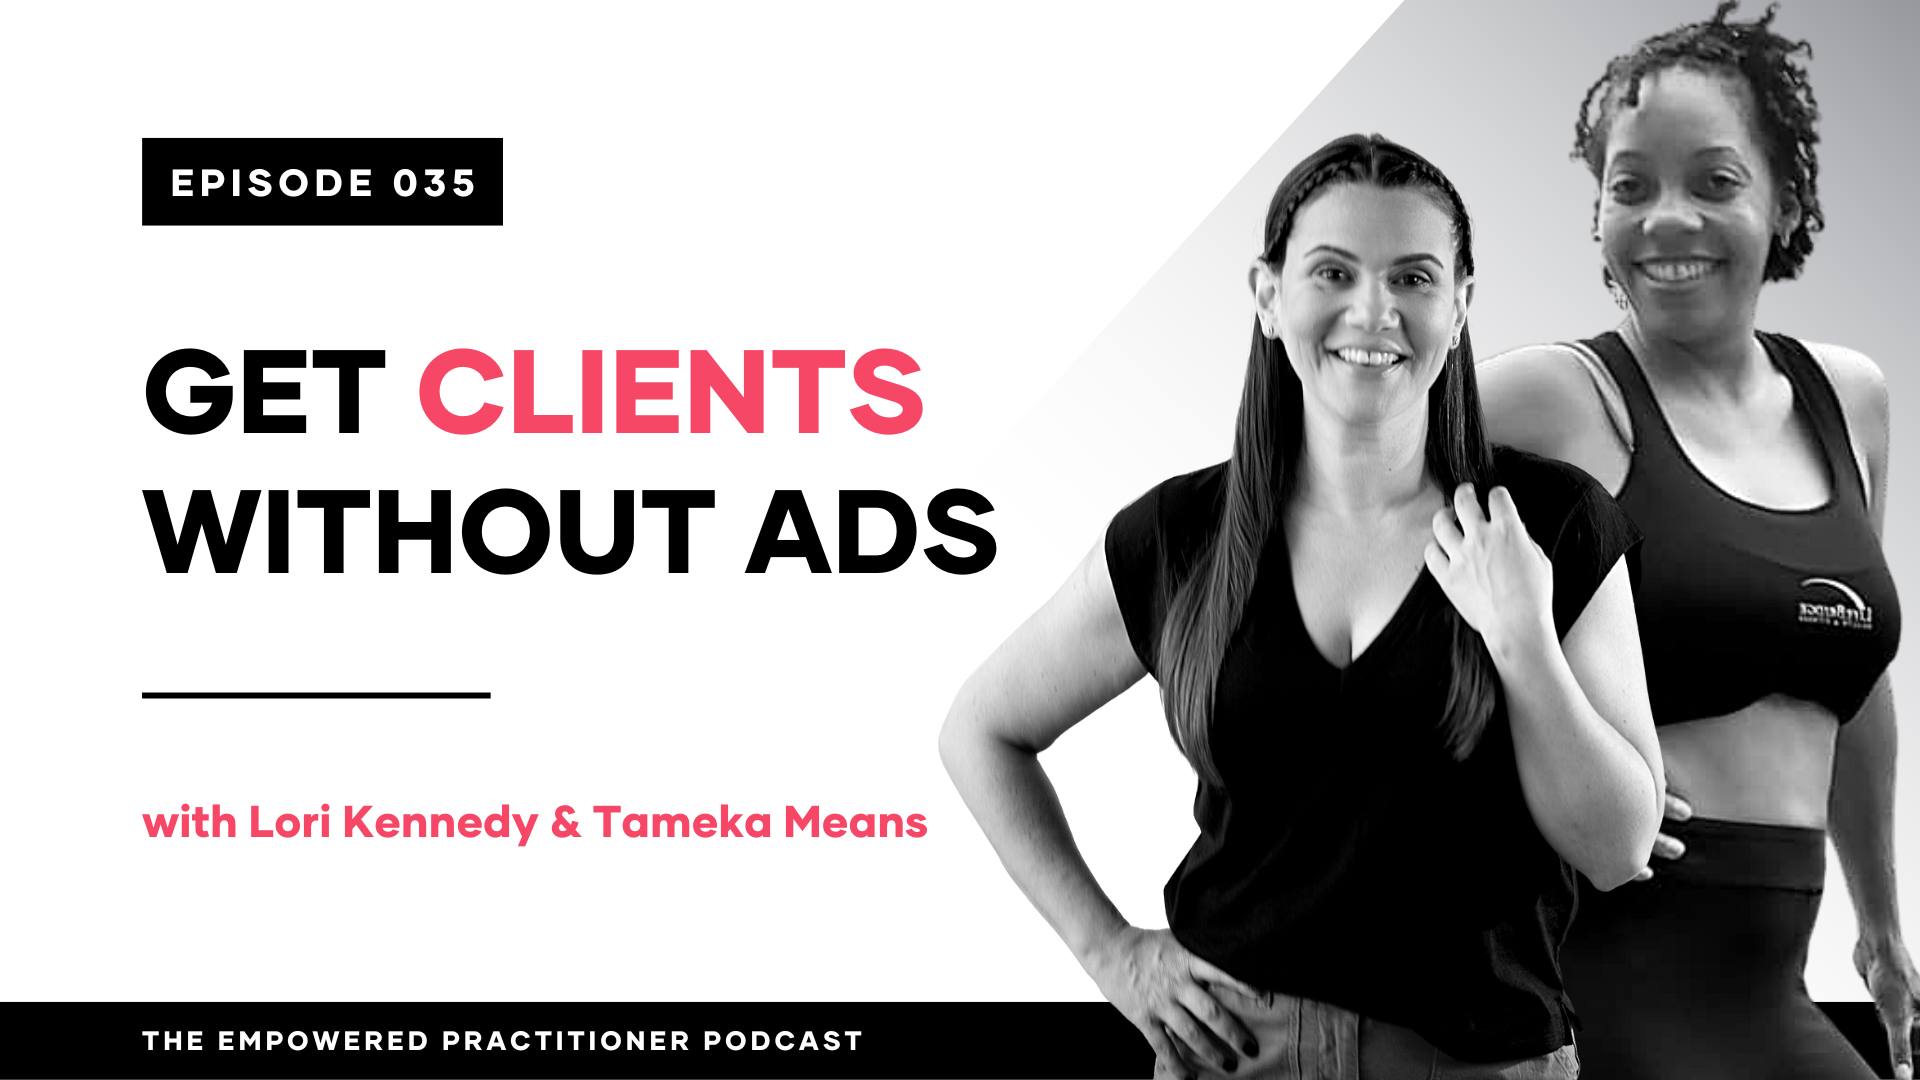 Get clients without ads